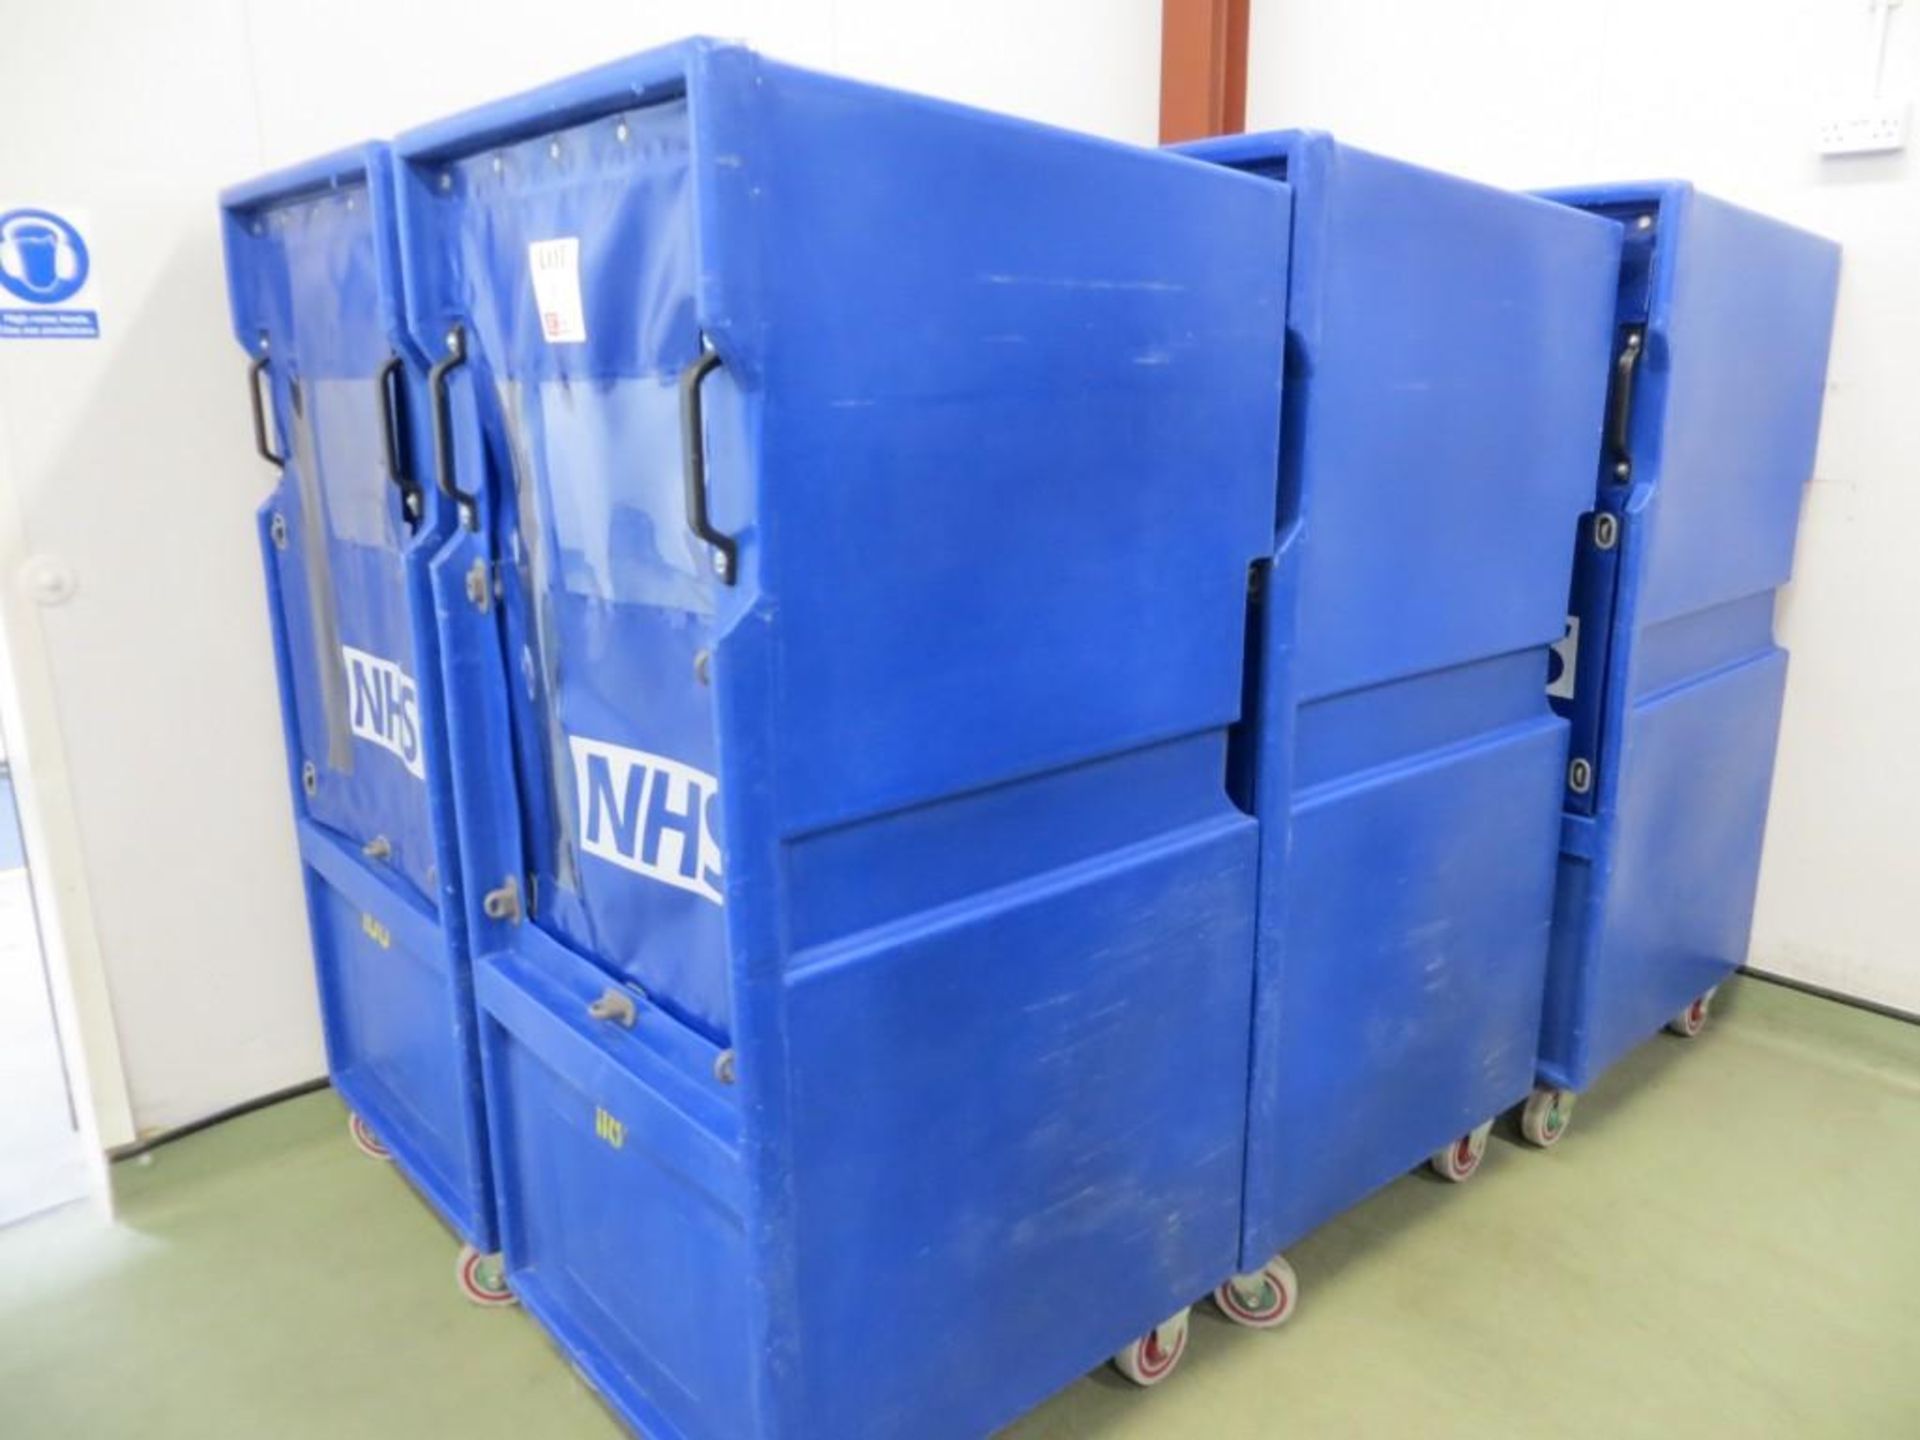 6 x Bryant plastic roll cages/laundry trolleys, 1700-700-800mm - Image 2 of 3